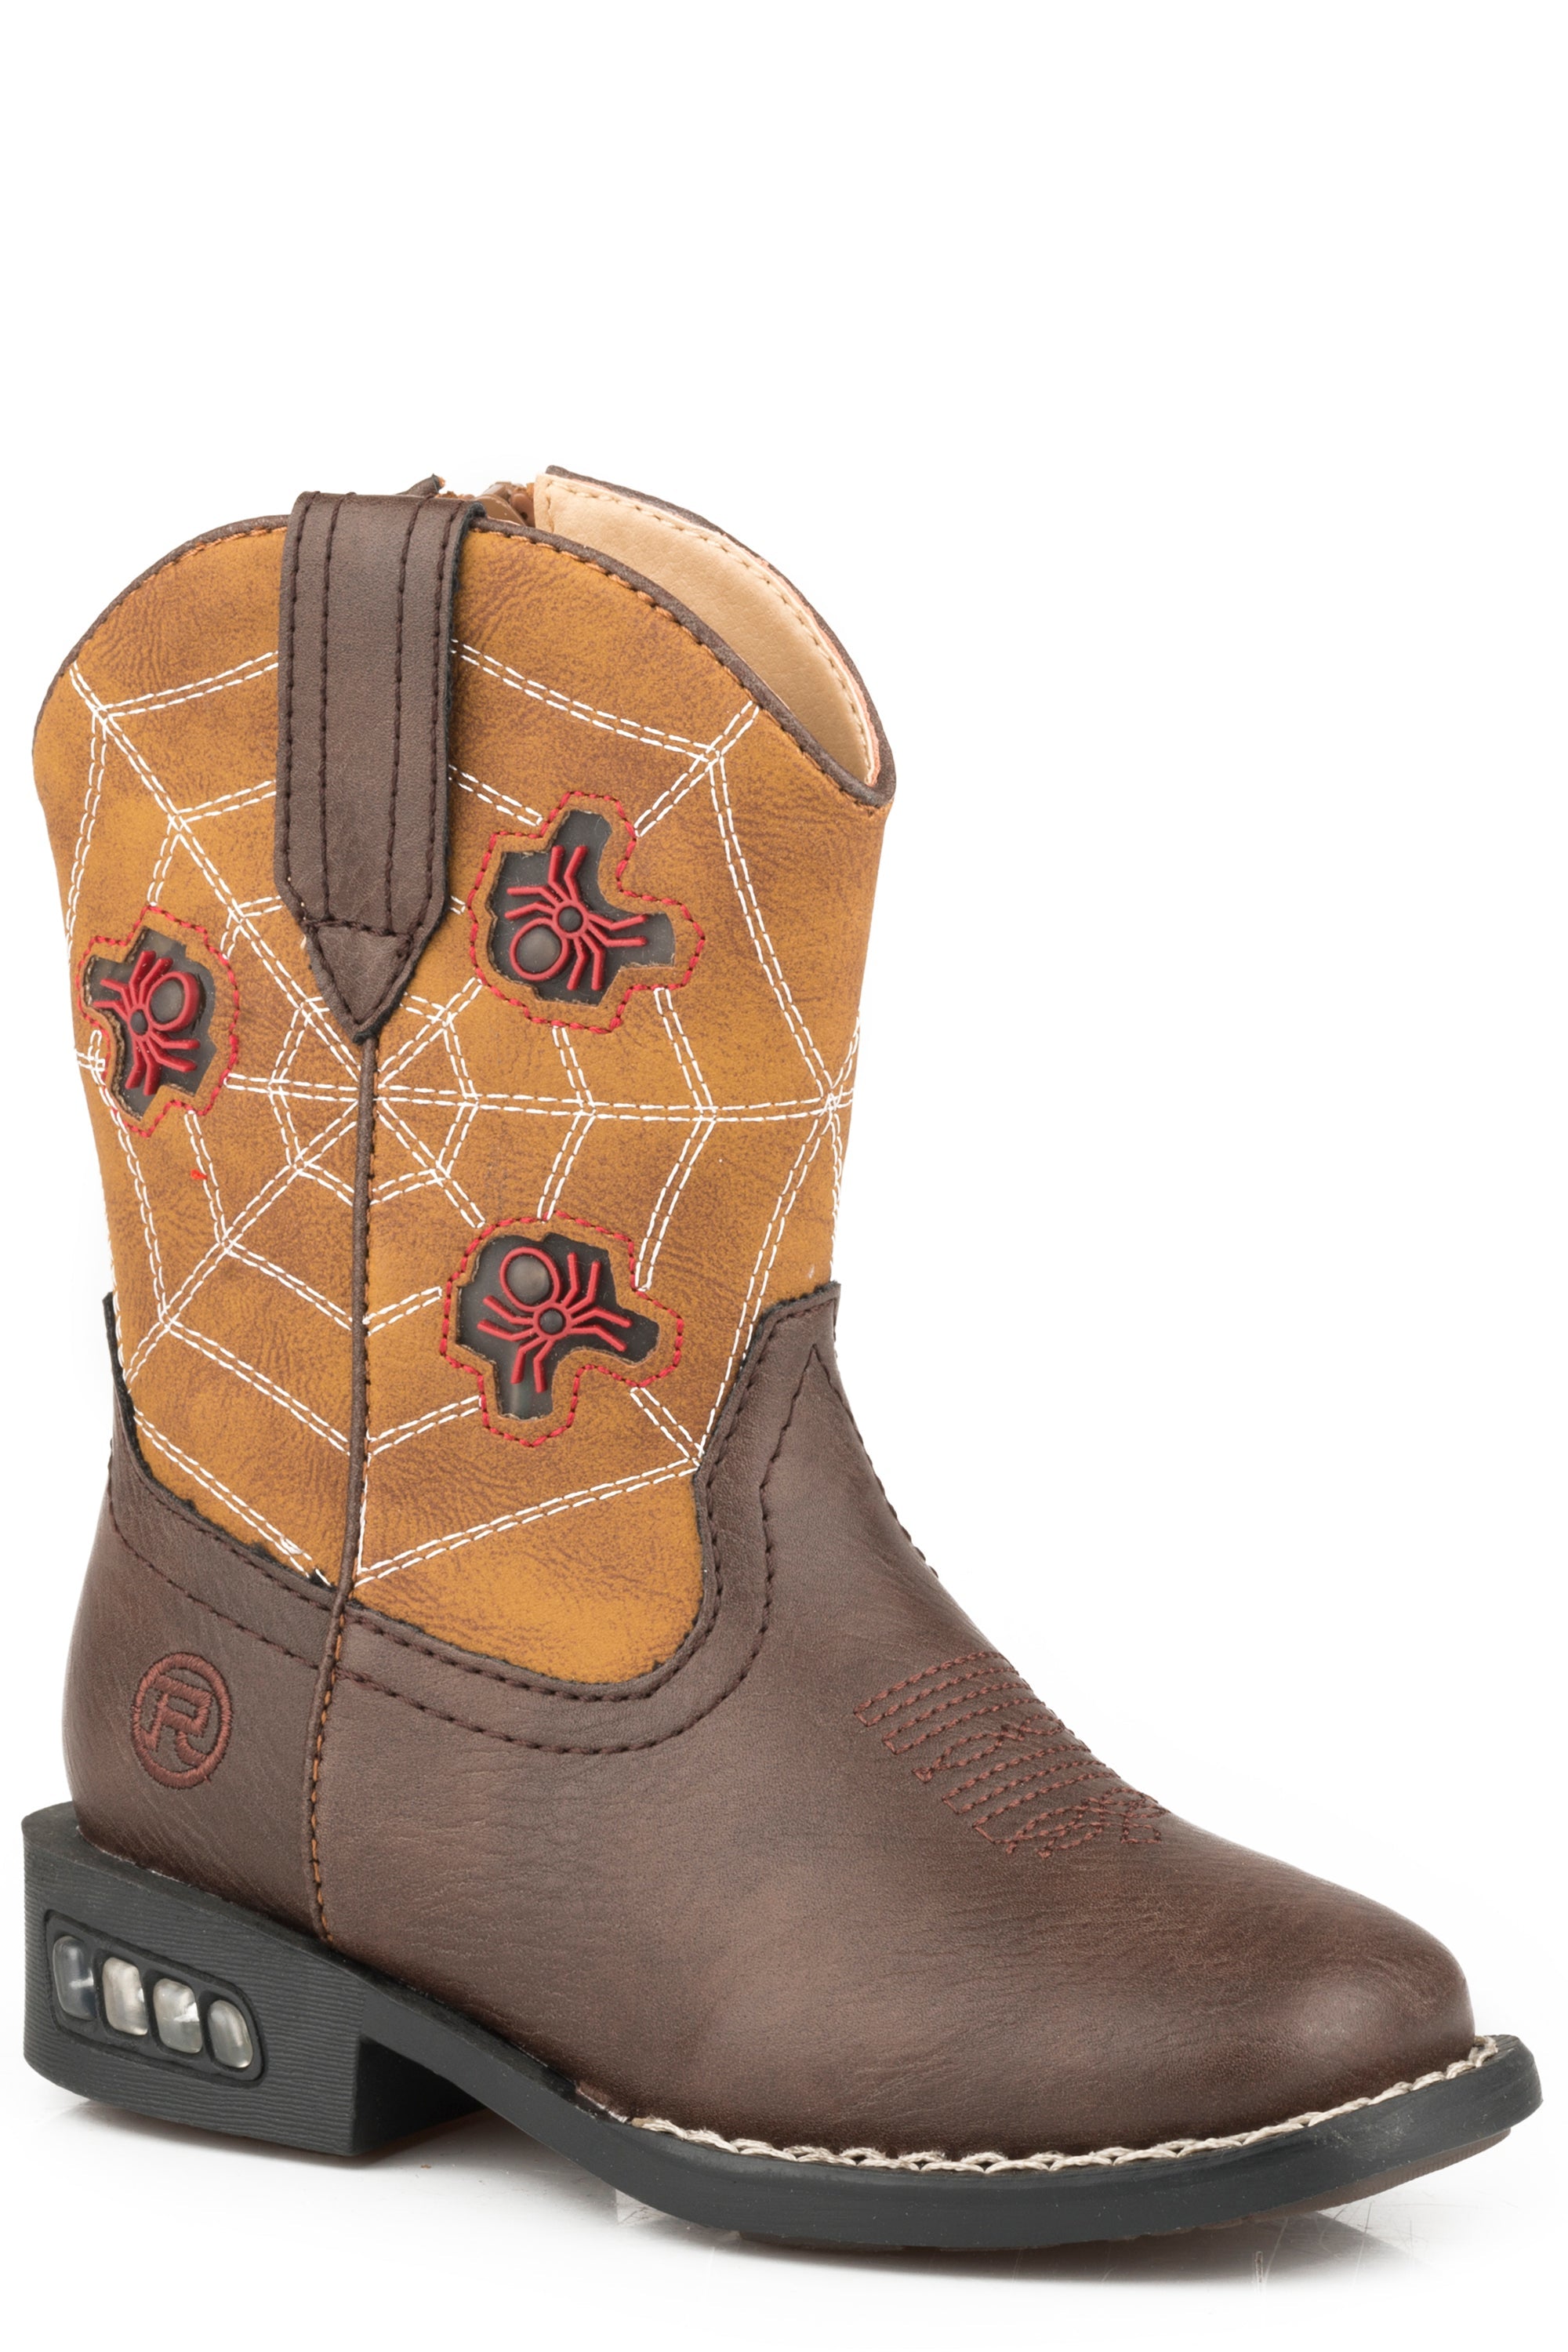 Roper Toddler Boys Spider Web Light Up Boots  Boot With Brown Vamp  Tan Shaft